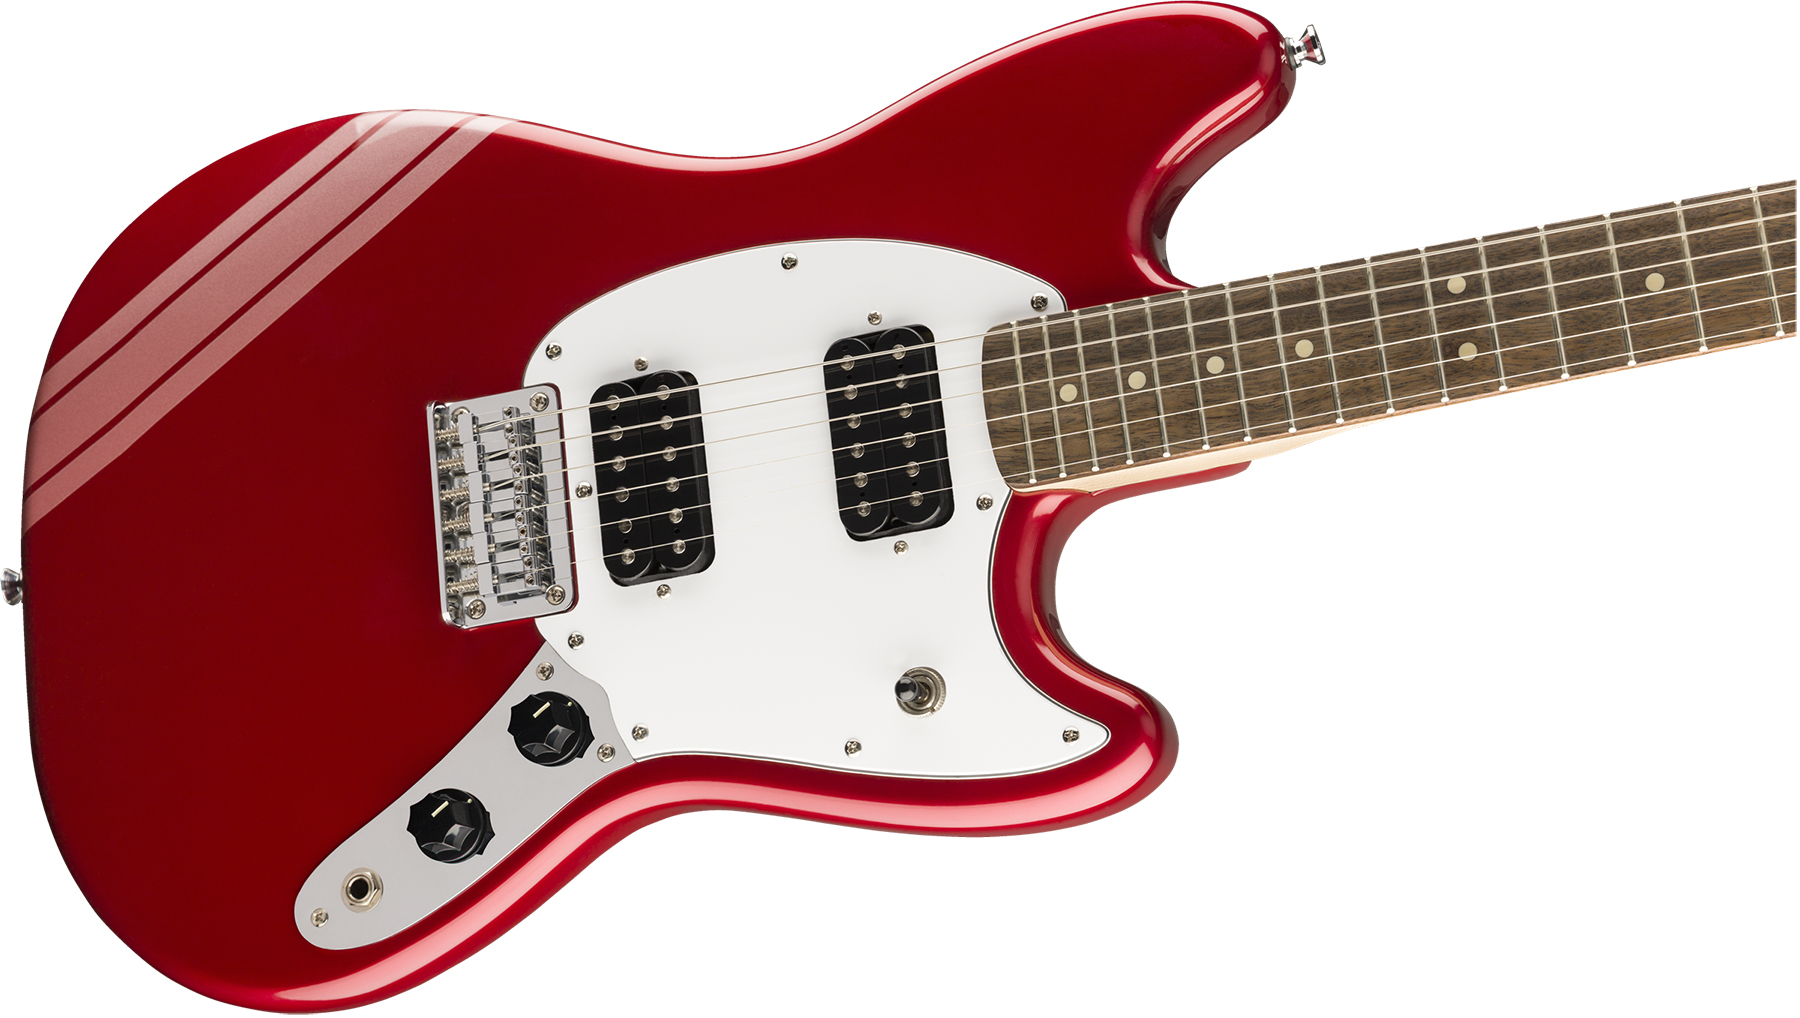 Squier Mustang Bullet Competition Hh Fsr Ht Lau - Candy Apple Red - Retro rock electric guitar - Variation 2